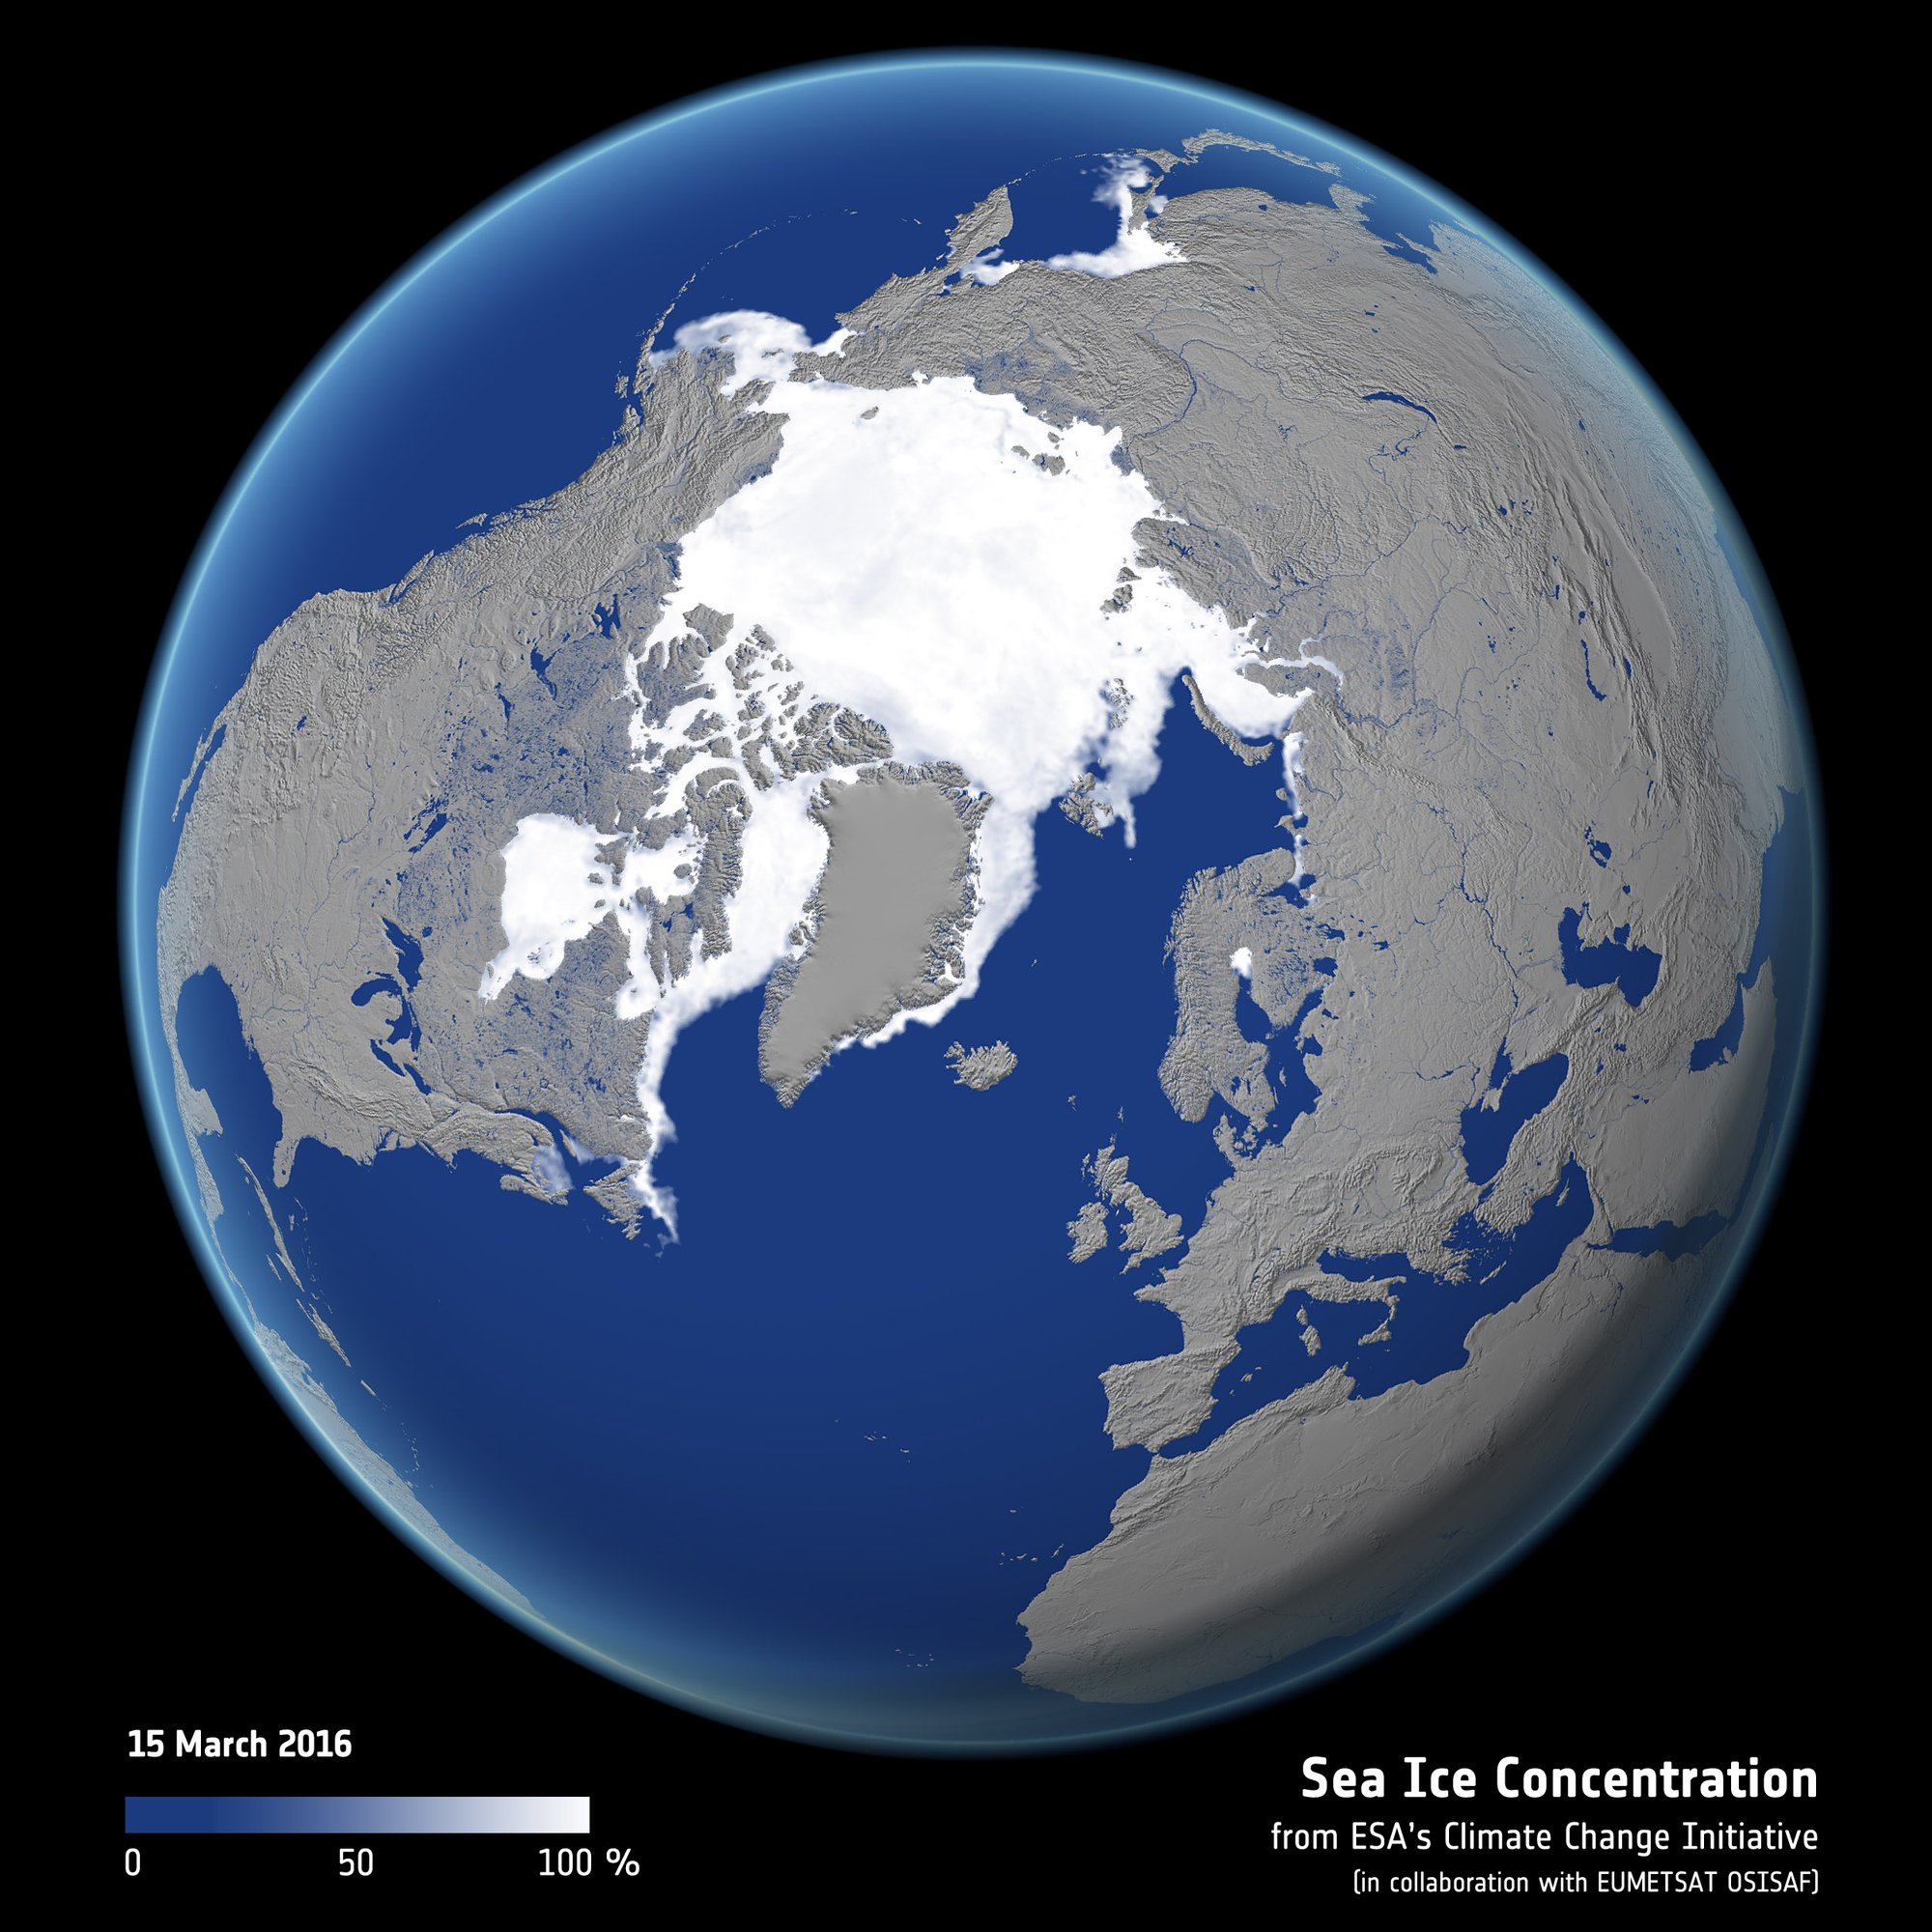 Sea ice concentration from the ESA Climate Change Initiative Sea ice project